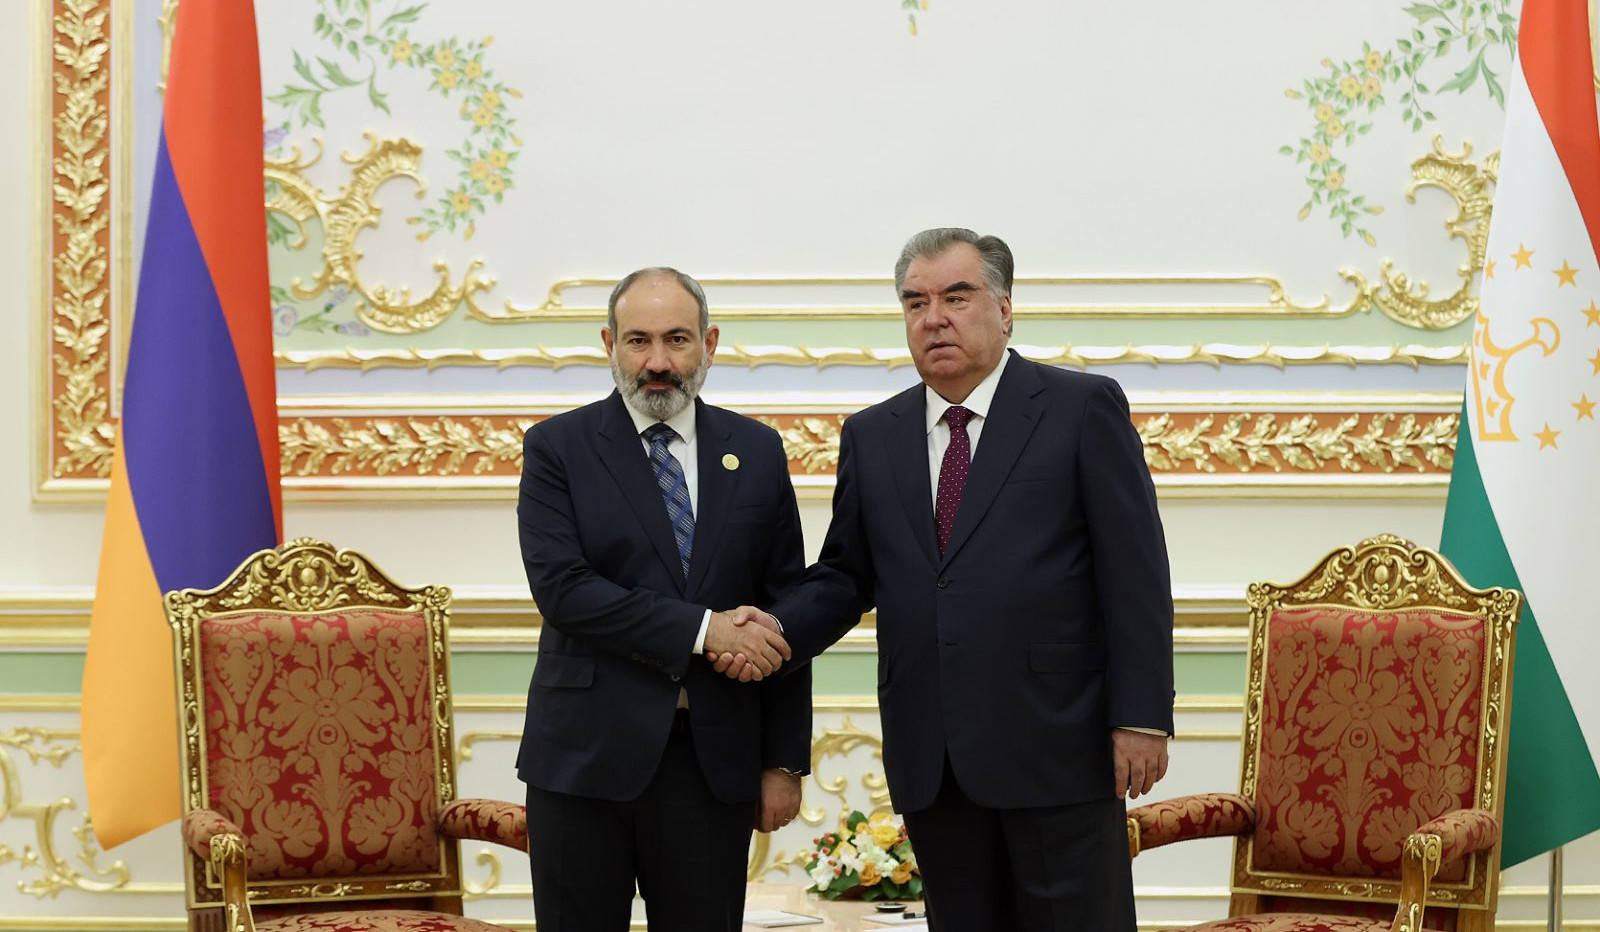 Tajikistan intends to strengthen and develop relations with Armenia in all directions: Rahmon to Pashinyan